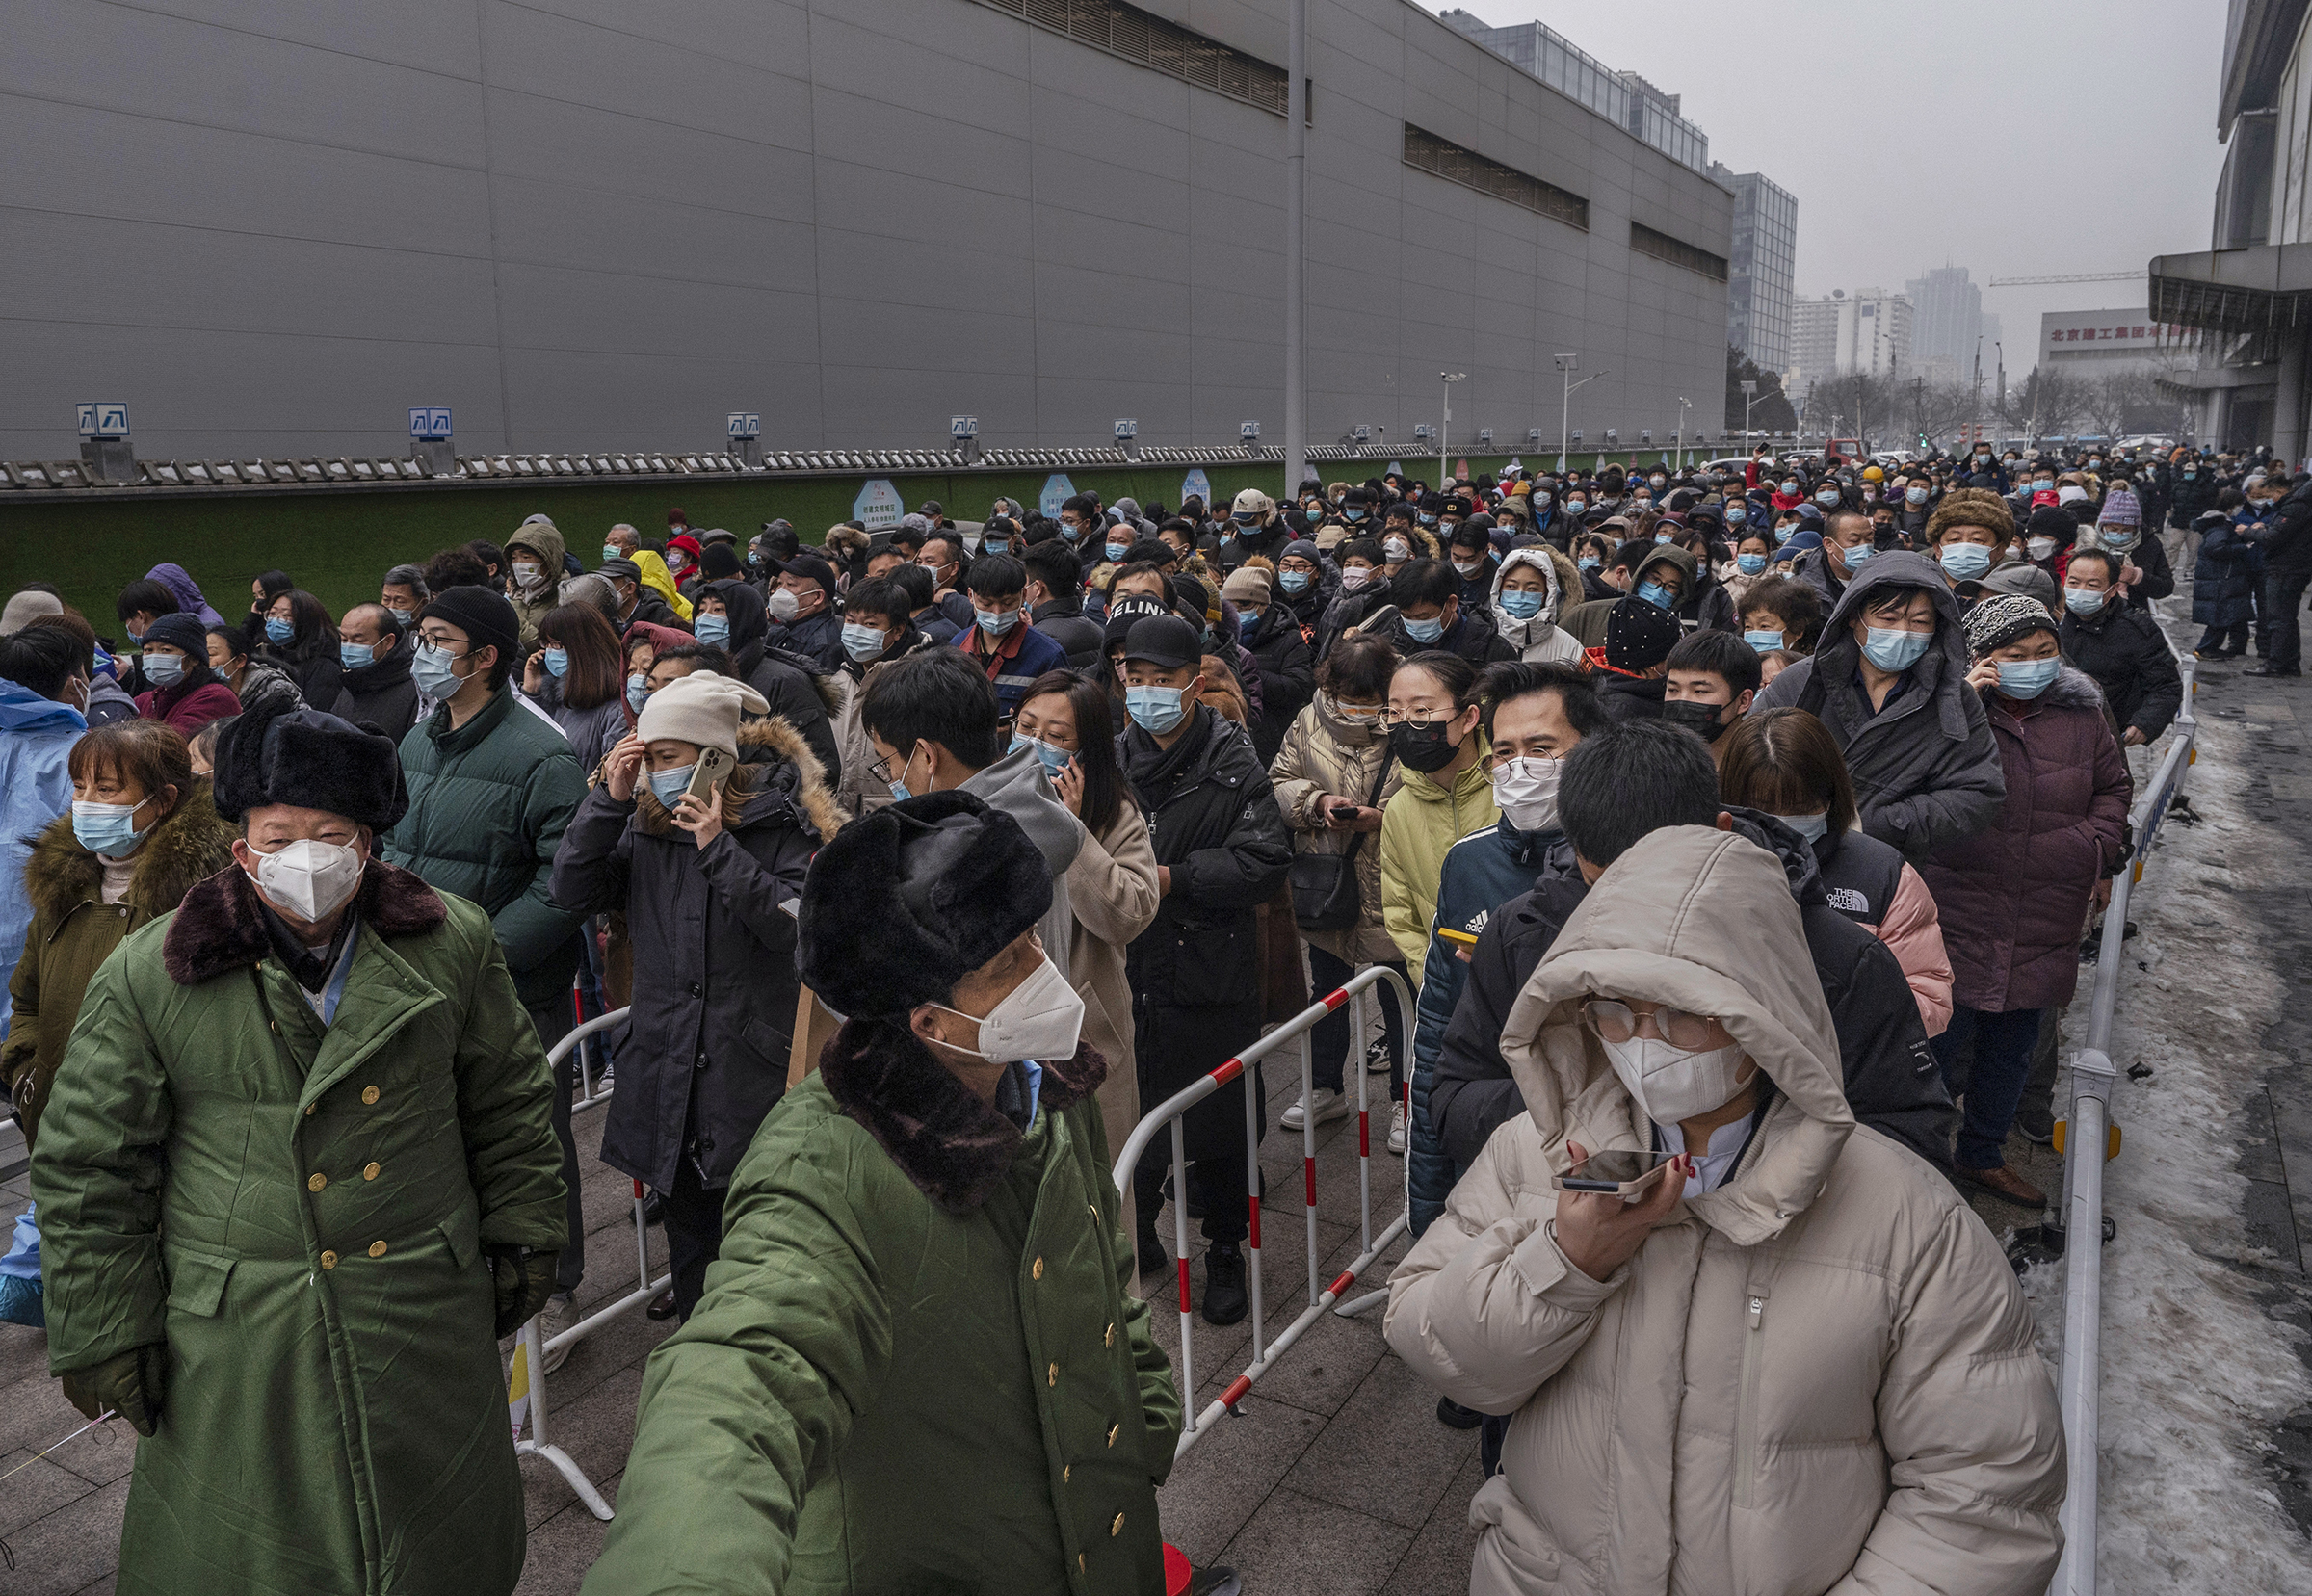 Security stand in front of people as they line up for nucleic acid tests to detect COVID-19 at a mass testing site on January 24, 2022 in Beijing, China. While China has mostly contained the spread of COVID-19 during the pandemic, and even though cases remain relatively low, recent outbreaks of the virus including the emergence of the highly contagious Omicron variant have prompted the government to lockdown people in various major cities and to reinforce stricter health measures. Mask mandates, mass testing, immunization boosters, quarantines, some travel restrictions and bans and lockdowns have become the norm as China continues to maintain its zero-COVID policy. (Kevin Frayer—Getty Images)